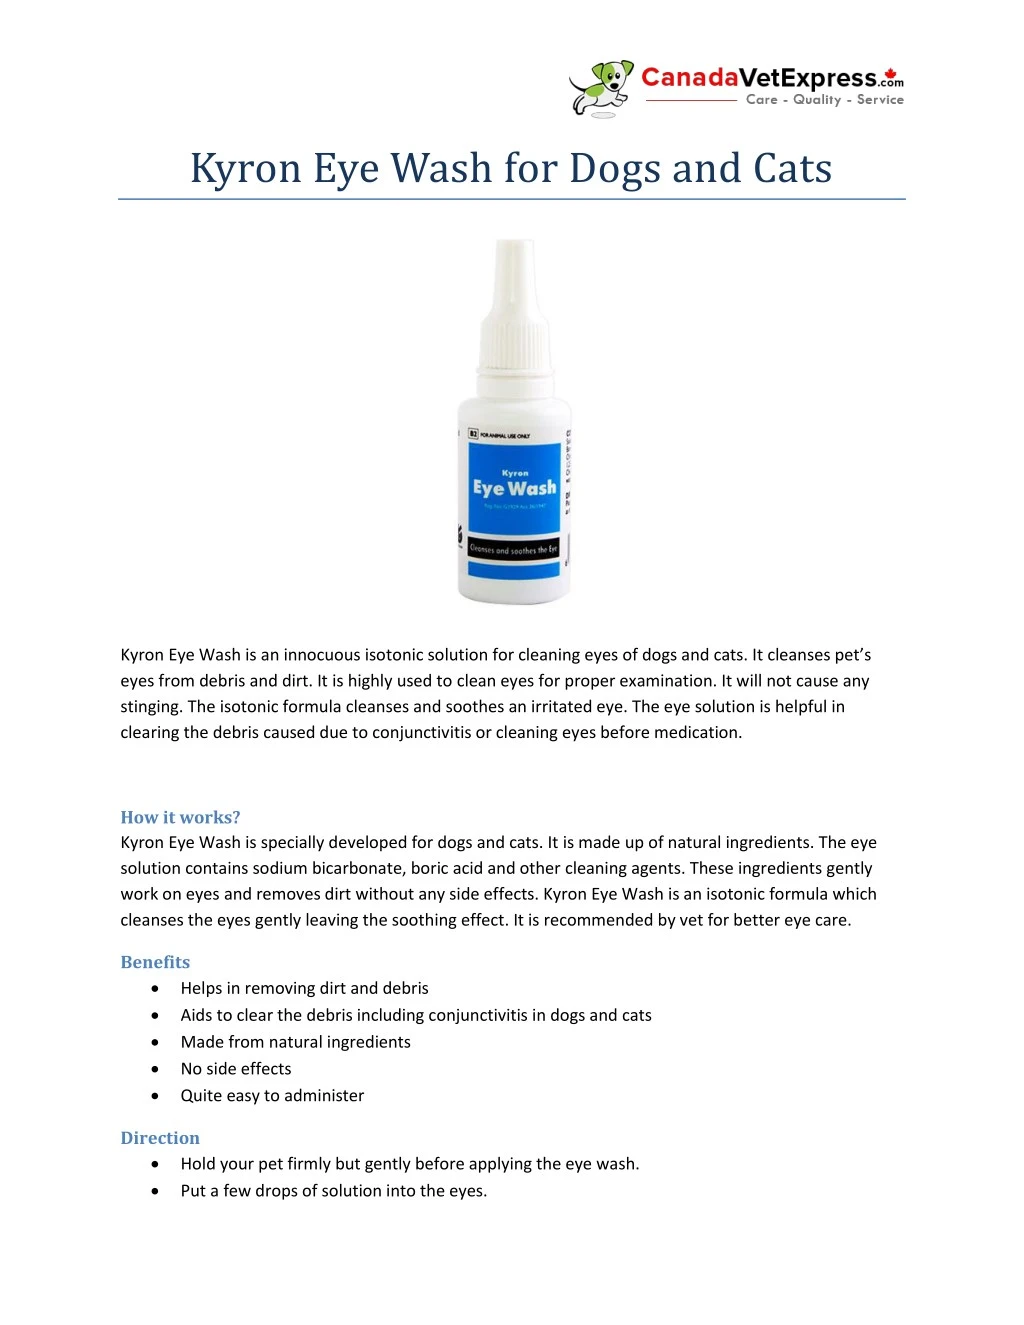 kyron eye wash for dogs and cats